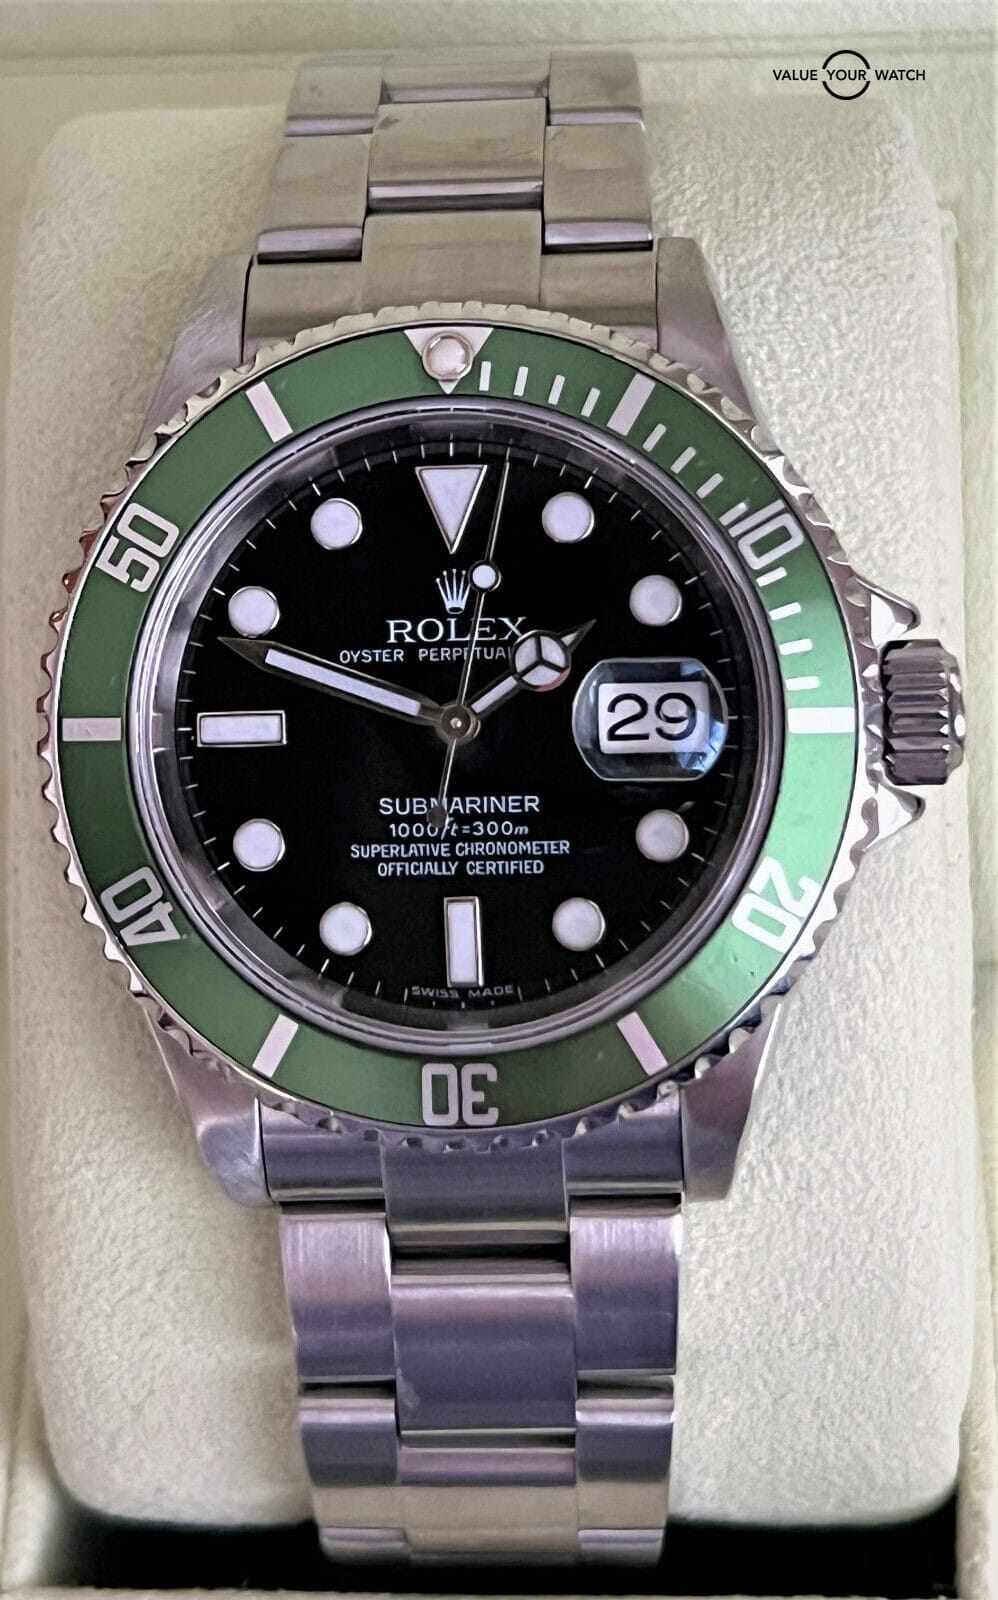 Submariner 16610LV Stainless Green Bezel/Black Dial/Serviced! | Value Your Watch